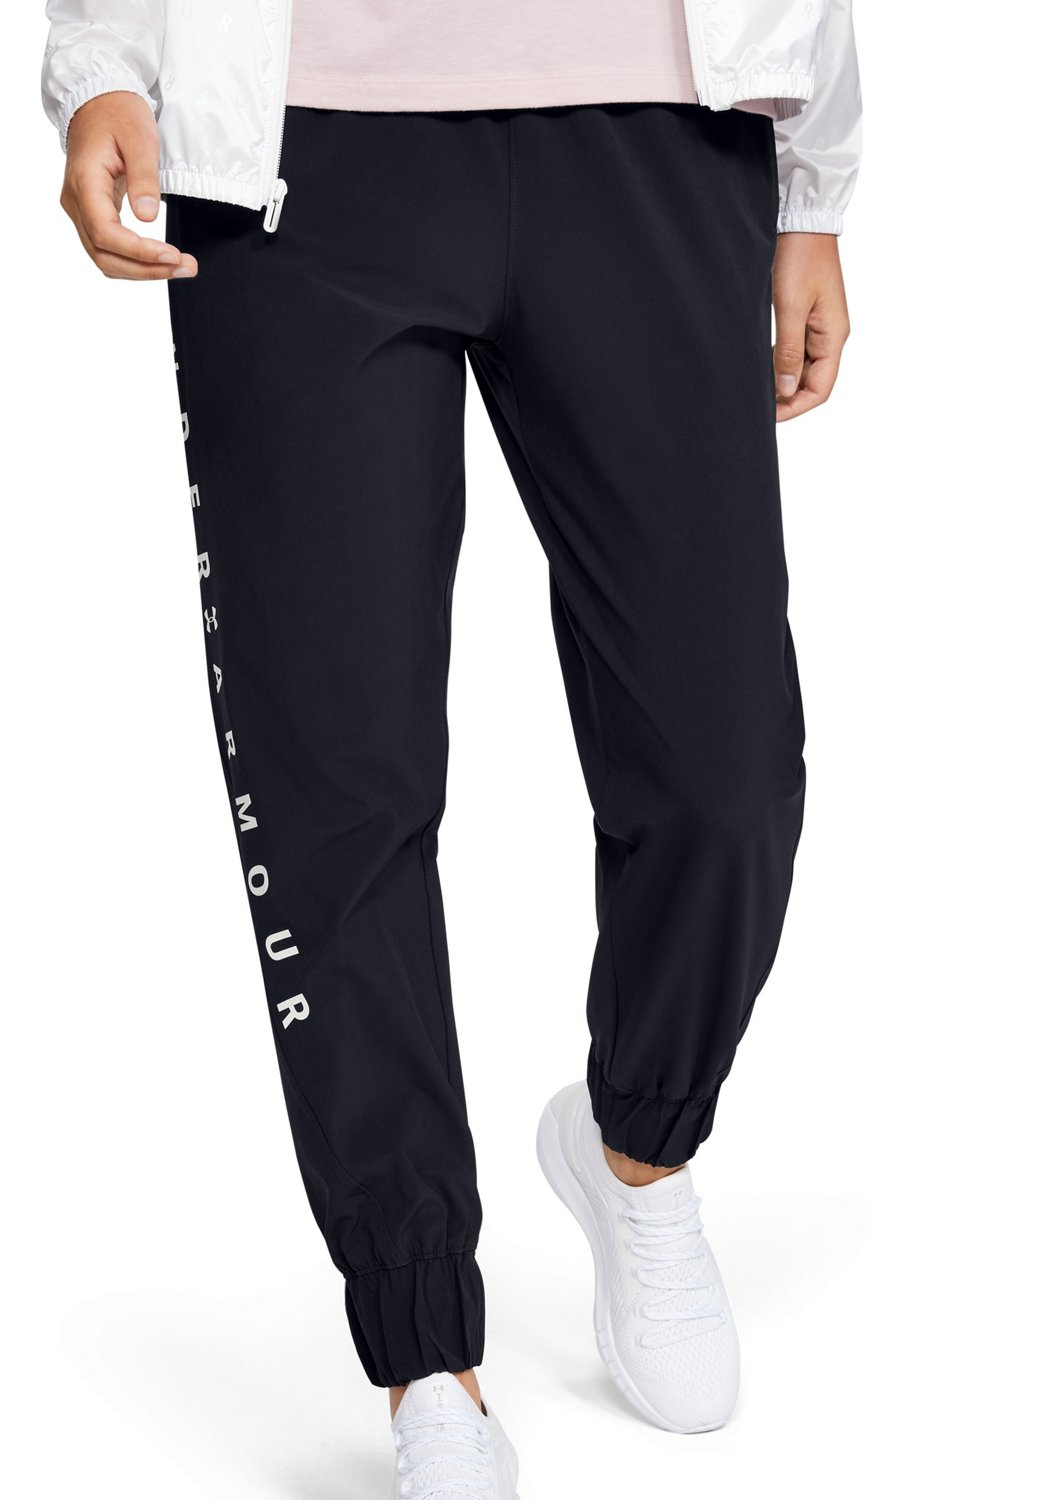 Under Armour Women's Woven Branded Sweatpants | Academy